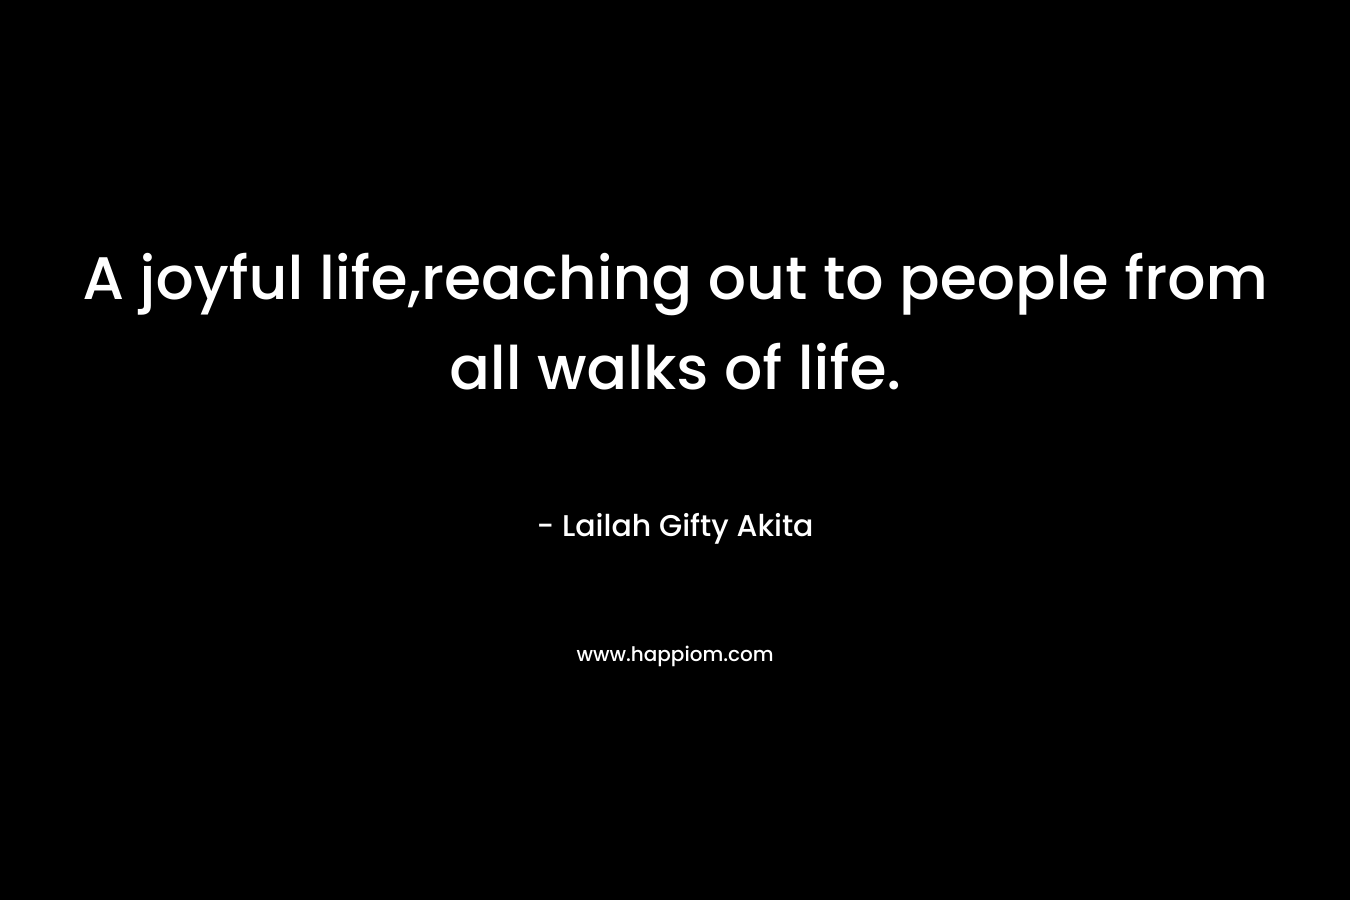 A joyful life,reaching out to people from all walks of life. – Lailah Gifty Akita